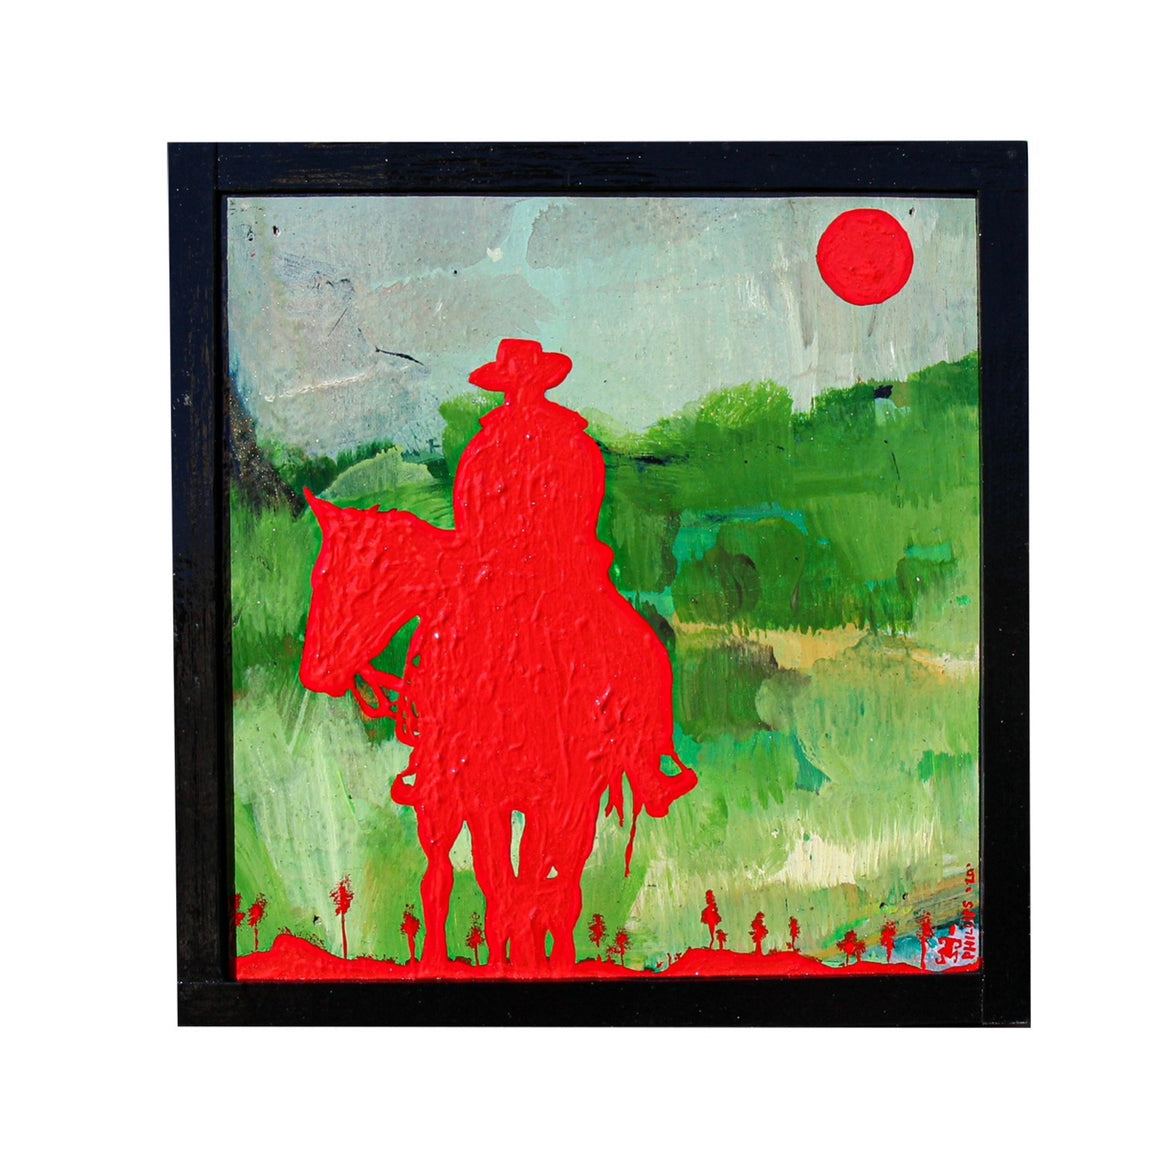 Cowboy of the Rising Sun - Brian Phillips - 5.5x5.75"